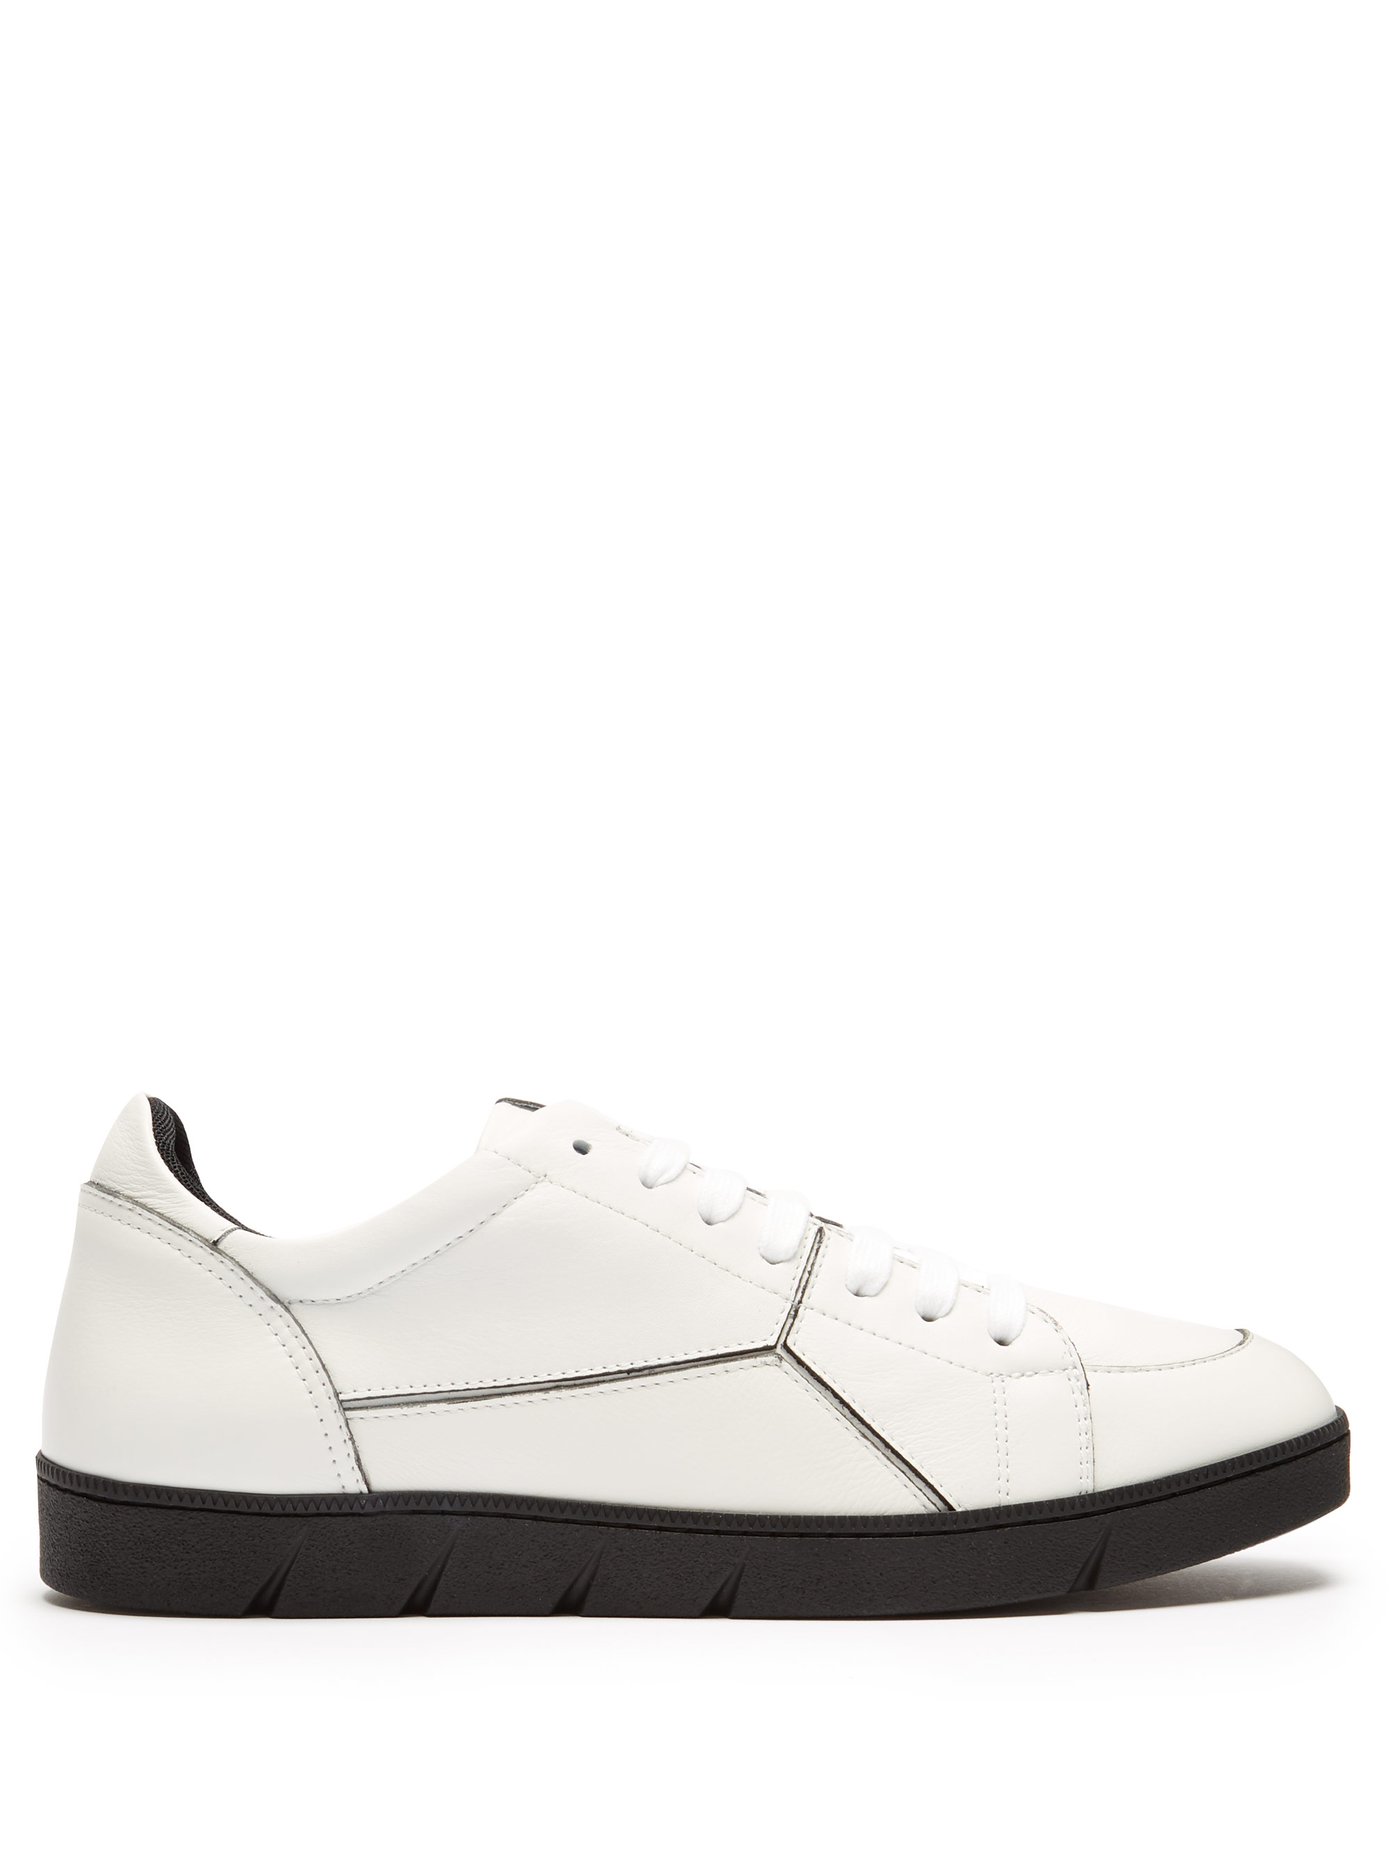 Puzzle low-top leather trainers | Loewe 